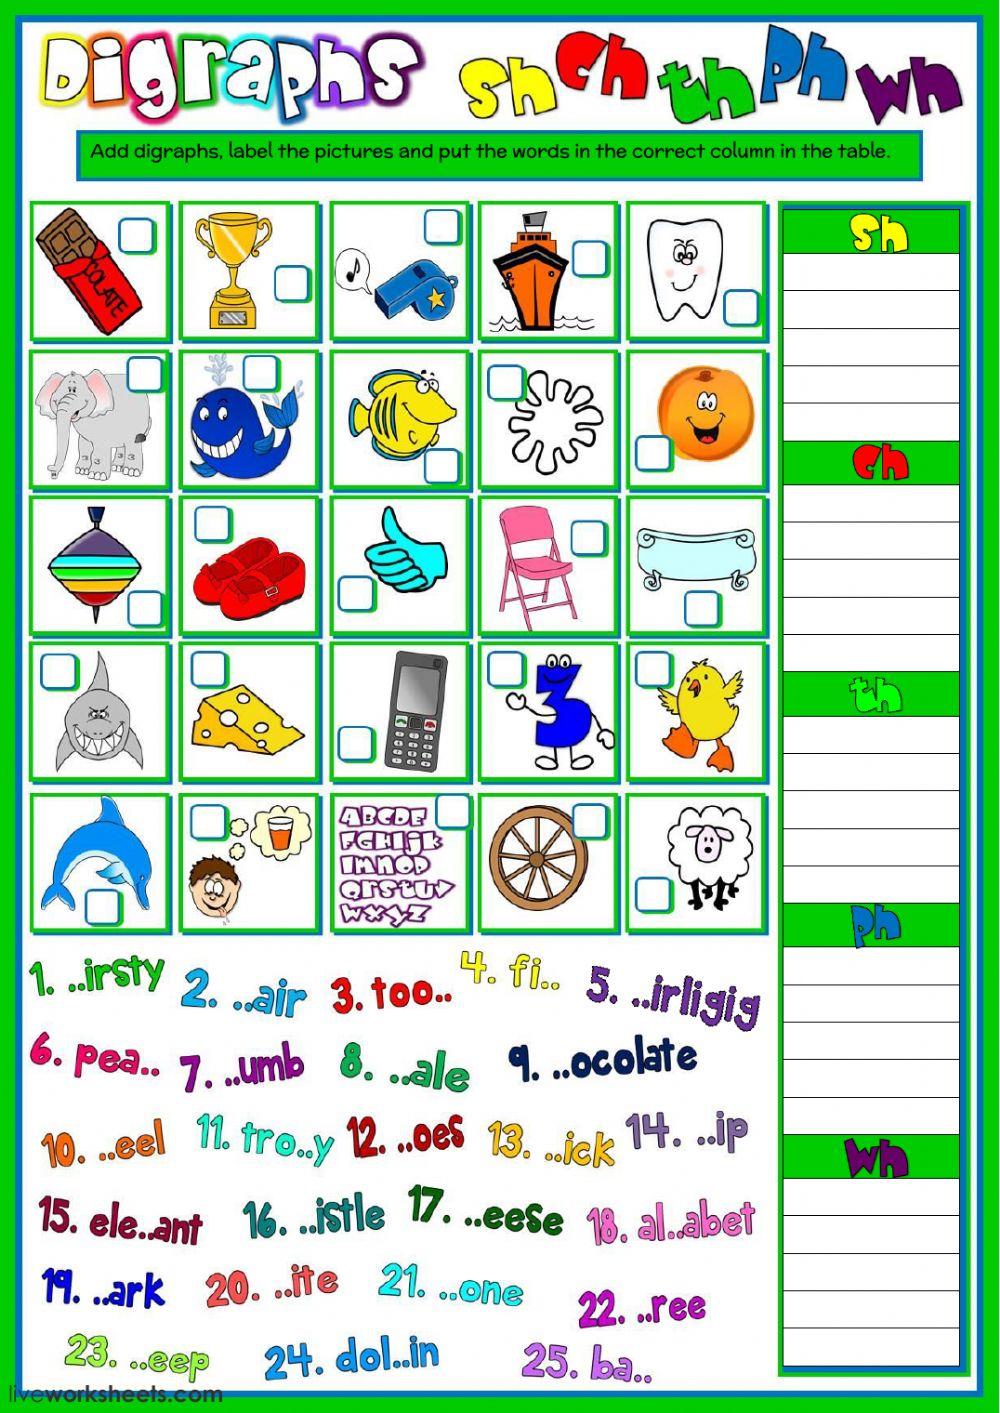 Digraphs - sh, ch, th, ph and wh